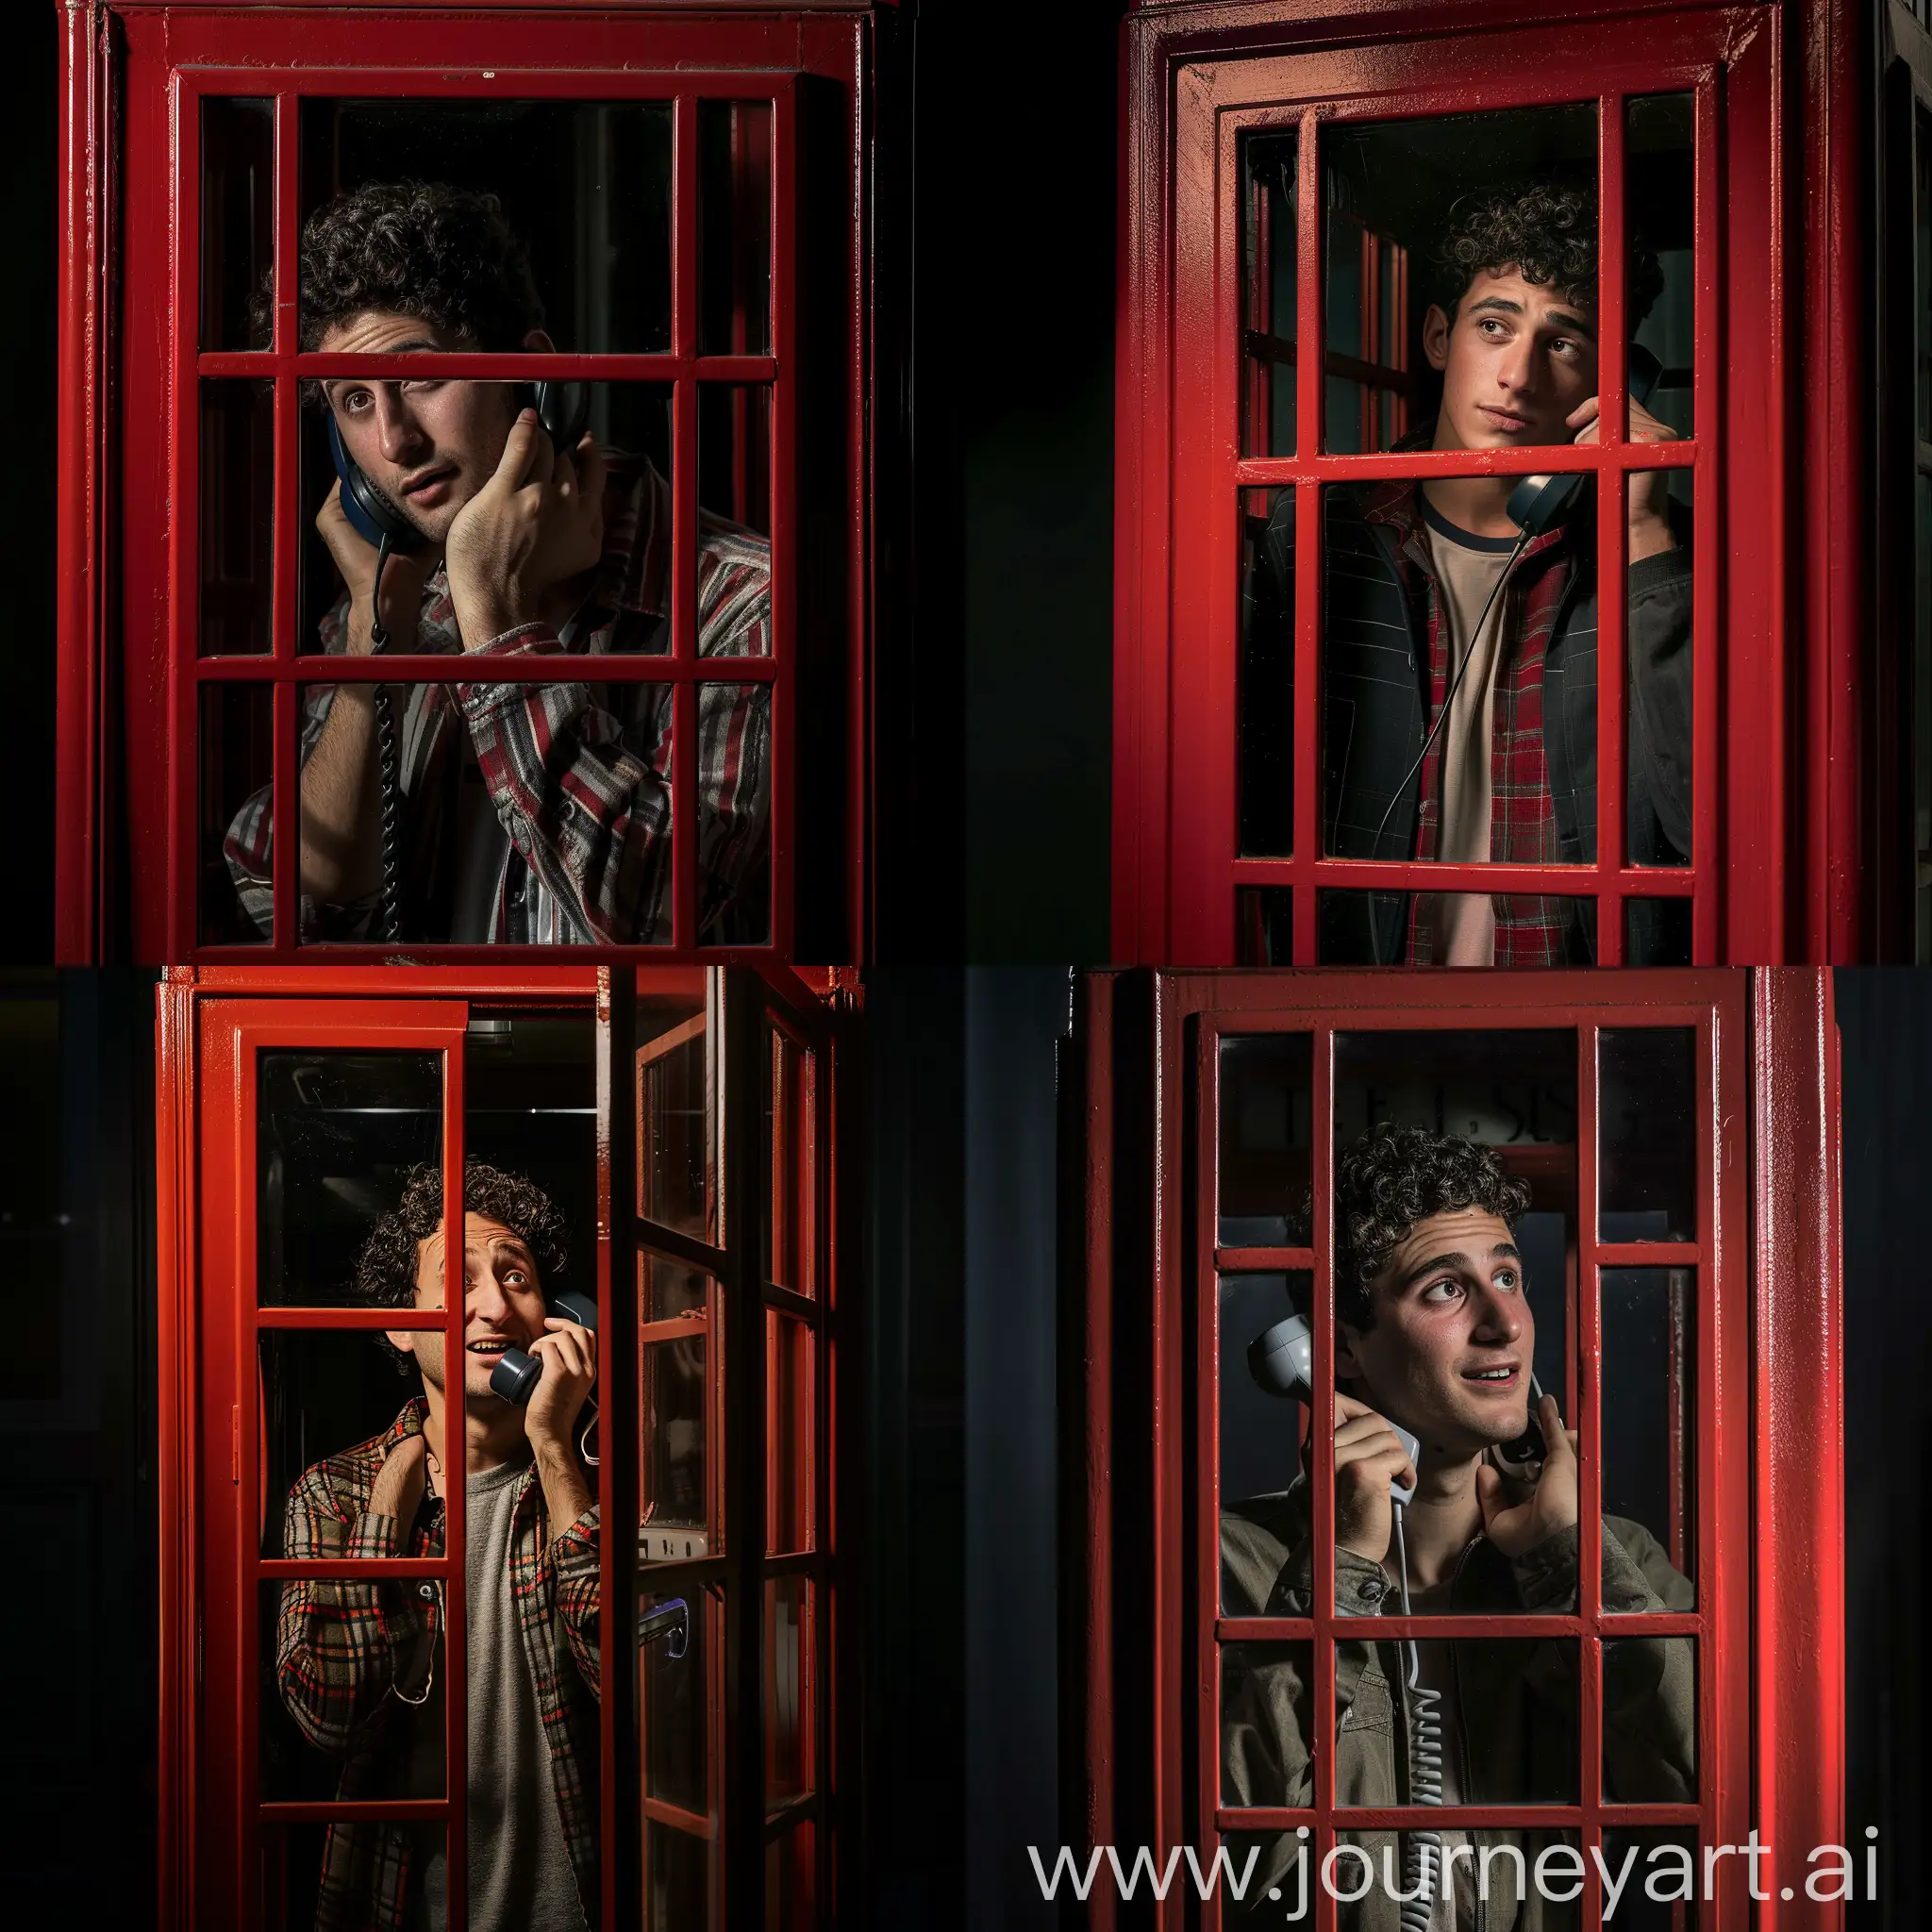 Handsome-Tel-Aviv-Man-Daydreaming-in-Red-Telephone-Box-at-Night